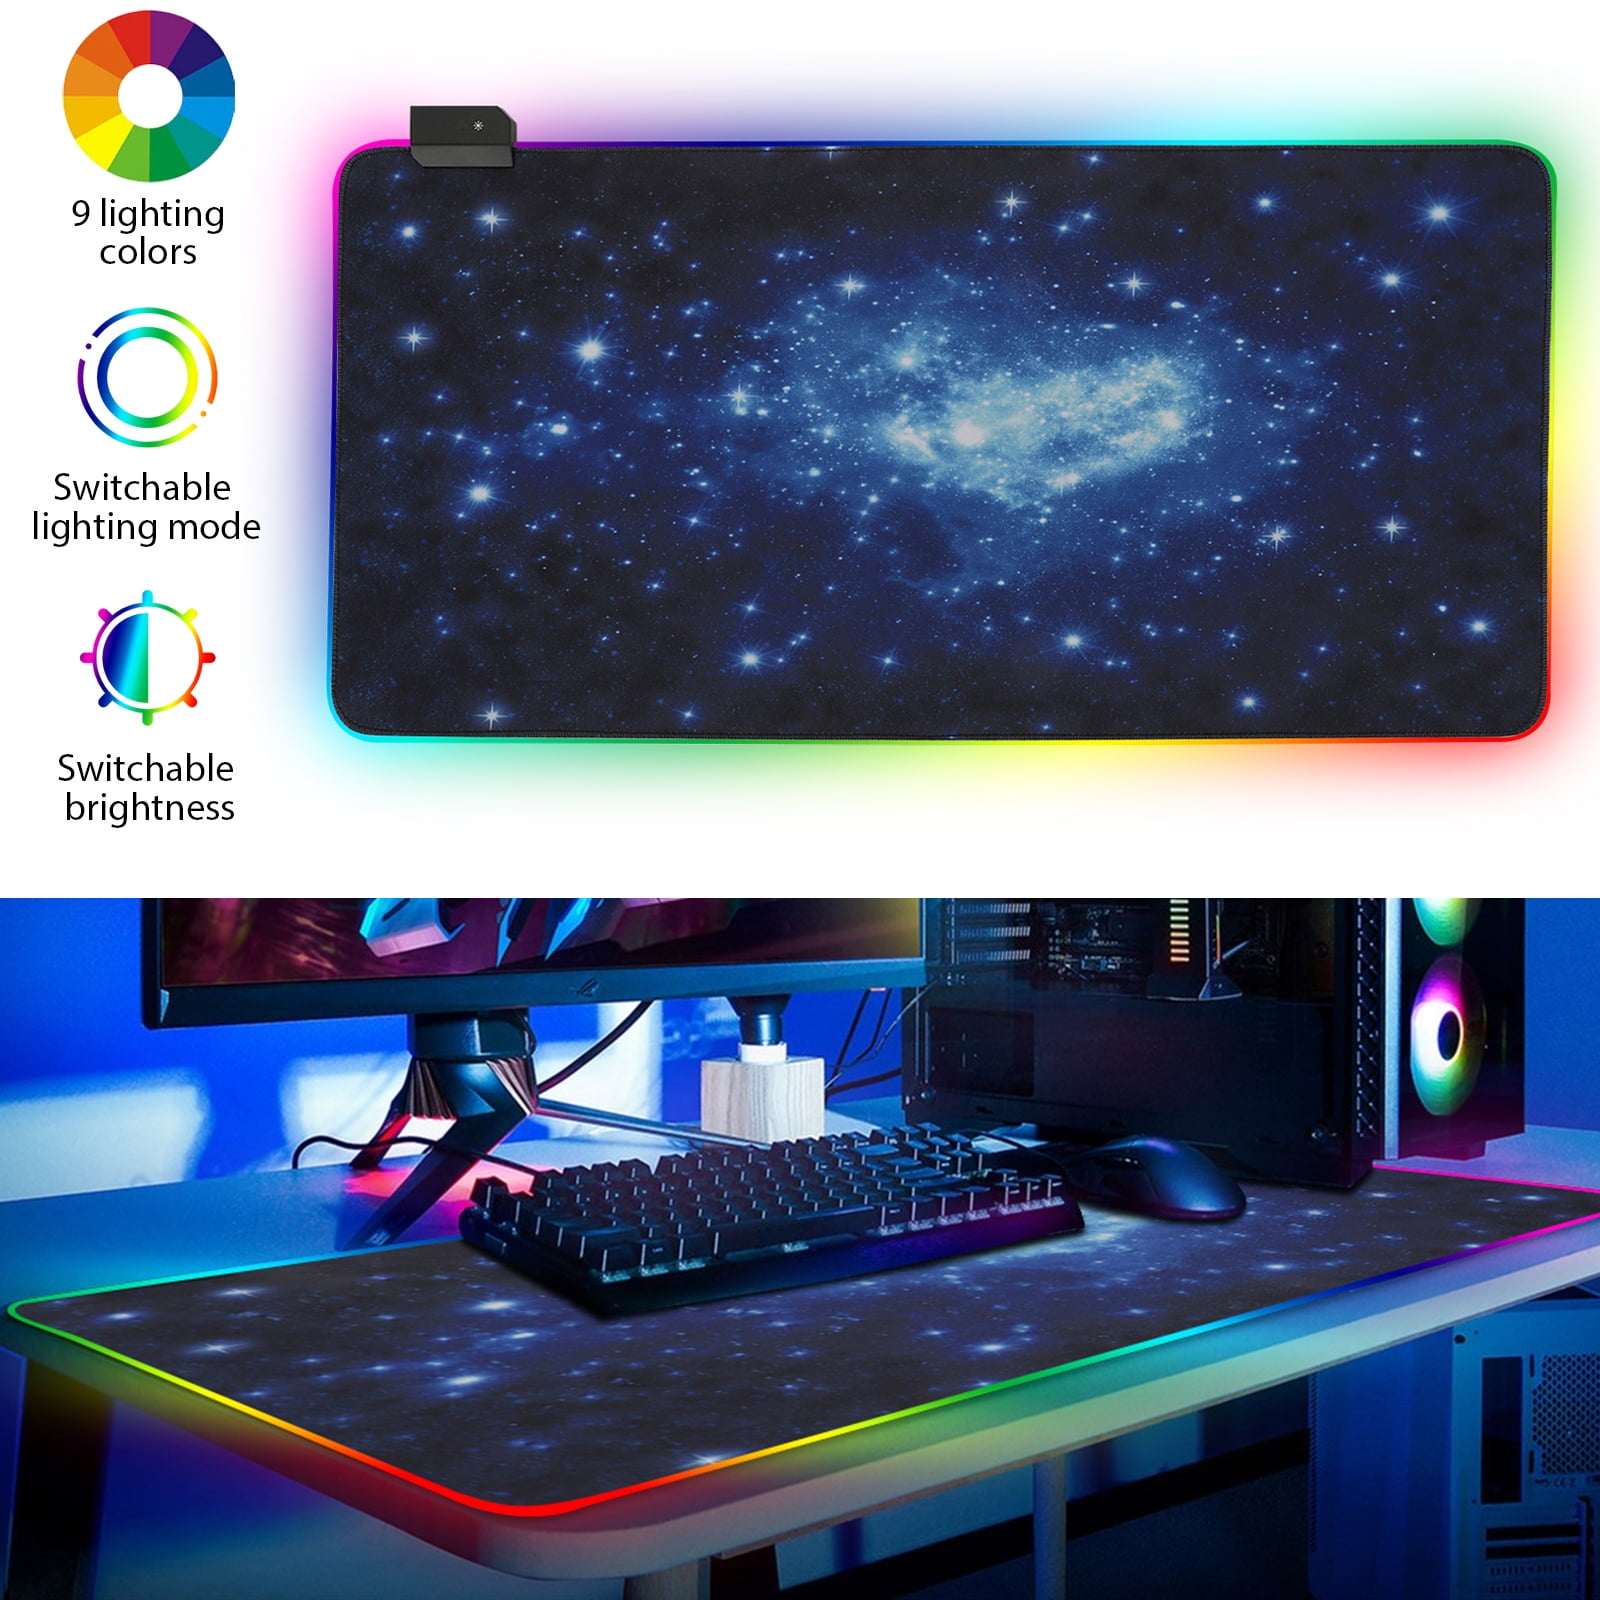 Extra Large Soft LED Extended Mouse pad Mouse Mat for Gamer Office & Home RGB Extended Gaming Mouse Pad World Map 11 Lighting Modes Non-Slip Rubber Base Computer Keyboard Pad Mat,31.5X11.8 in